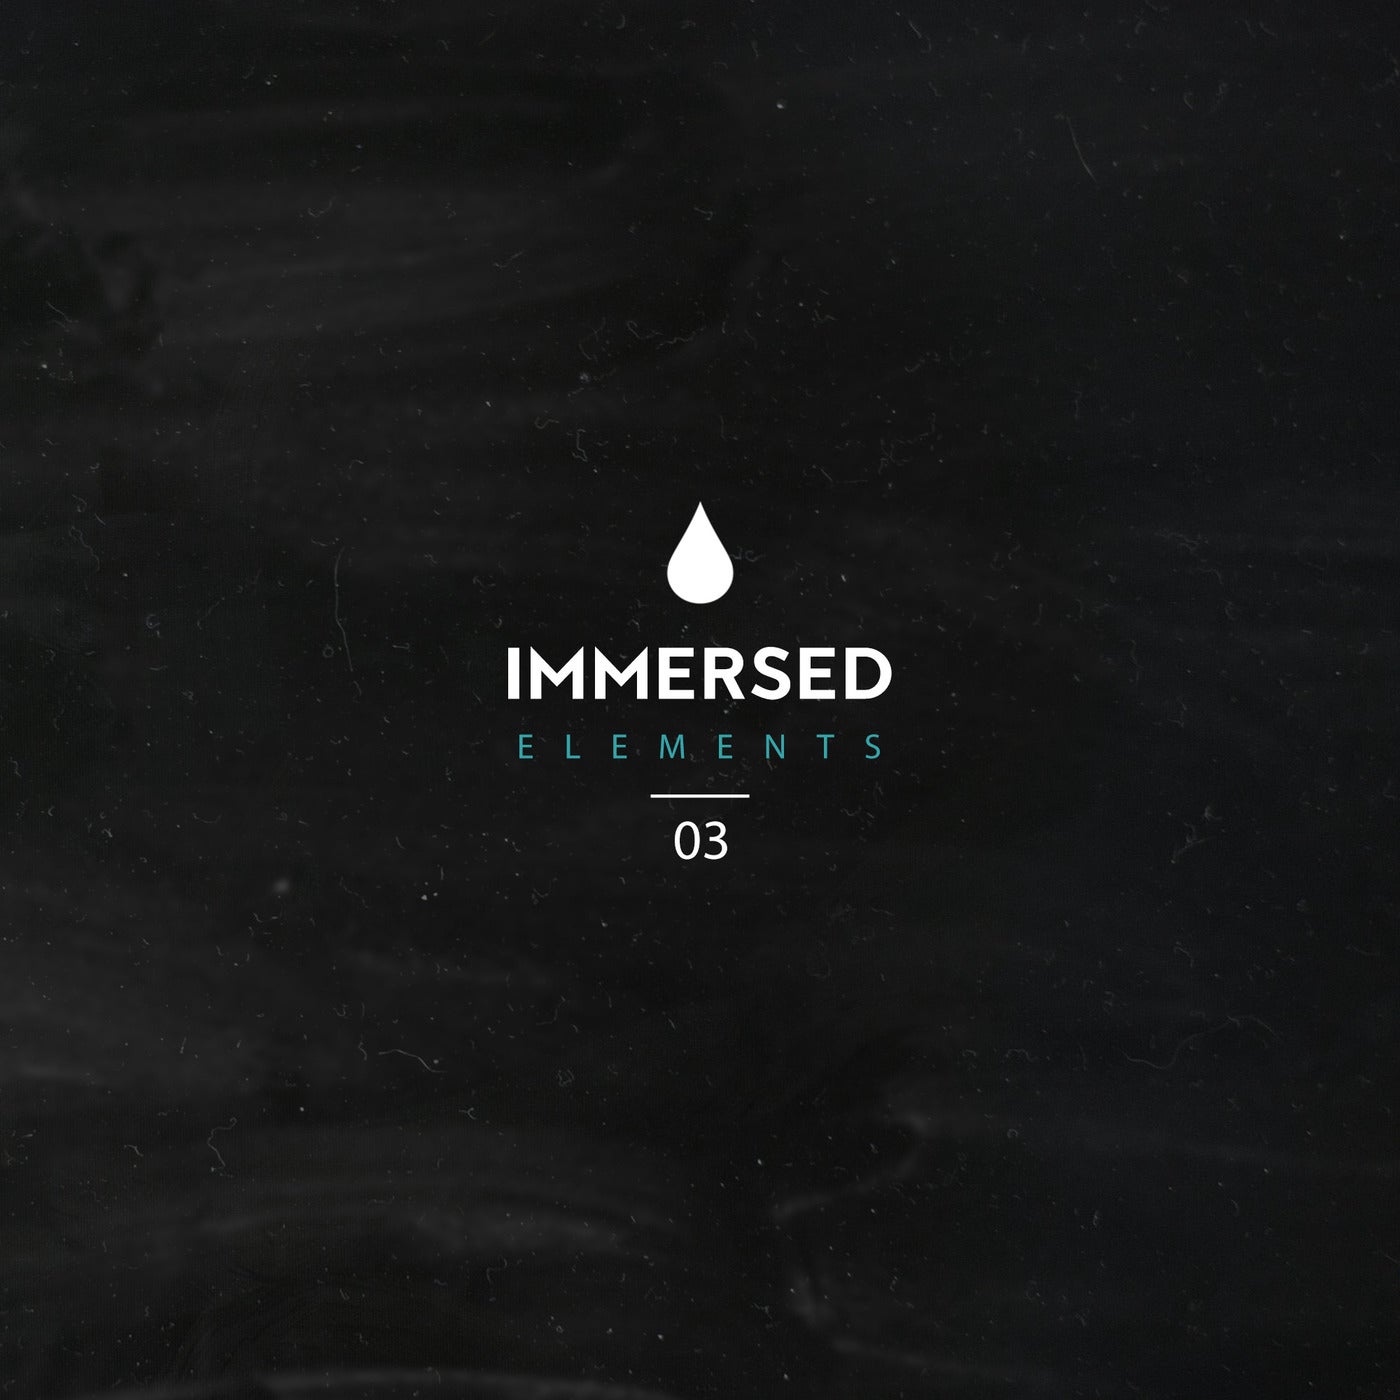 Immersed Elements 03